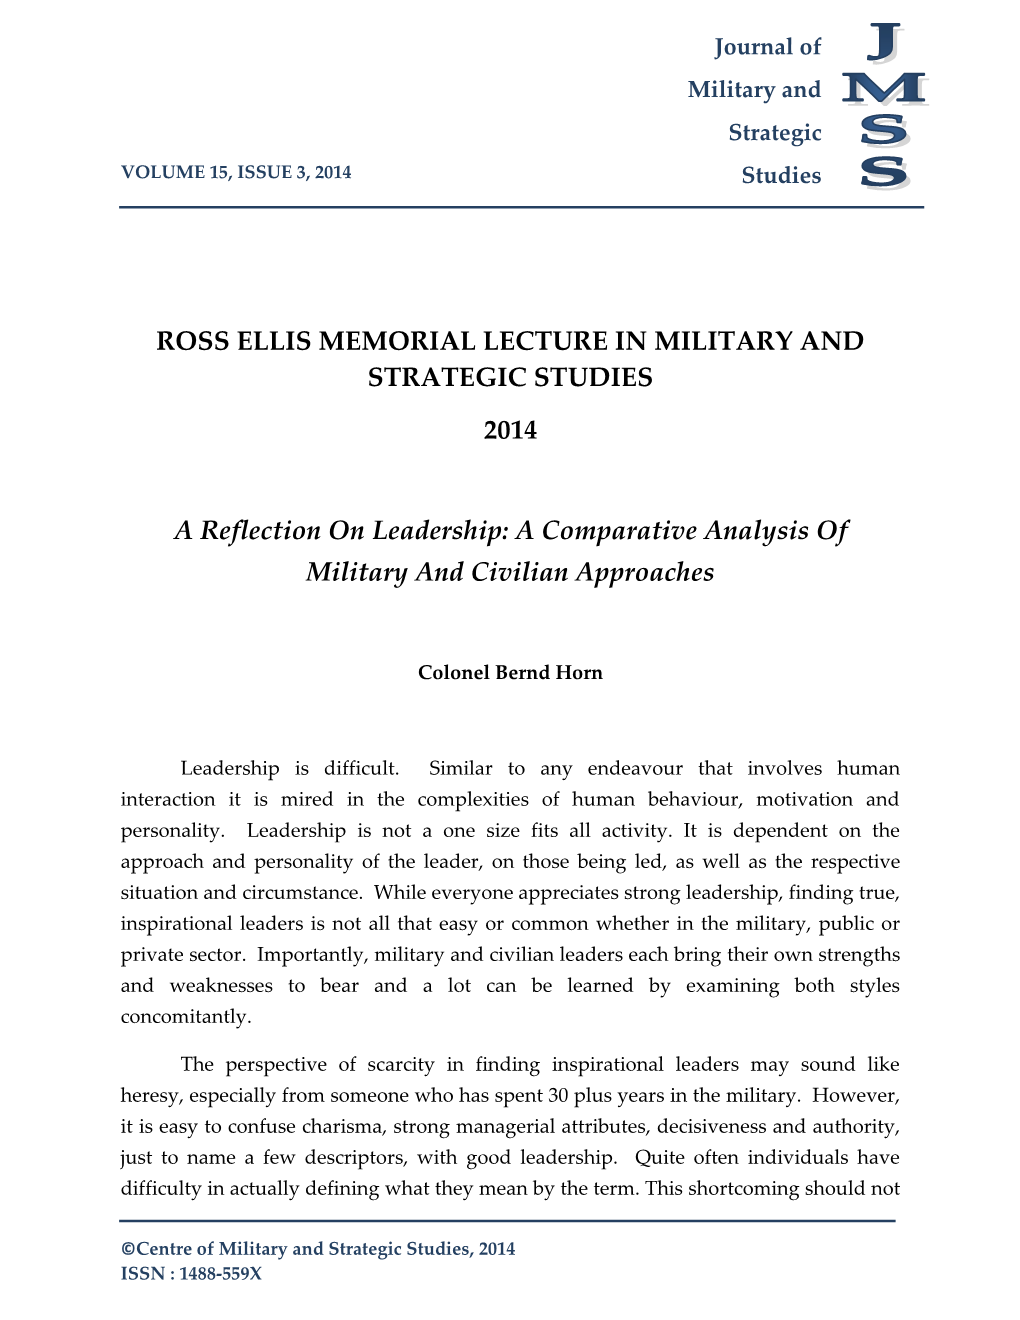 ROSS ELLIS MEMORIAL LECTURE in MILITARY and STRATEGIC STUDIES 2014 a Reflection on Leadership